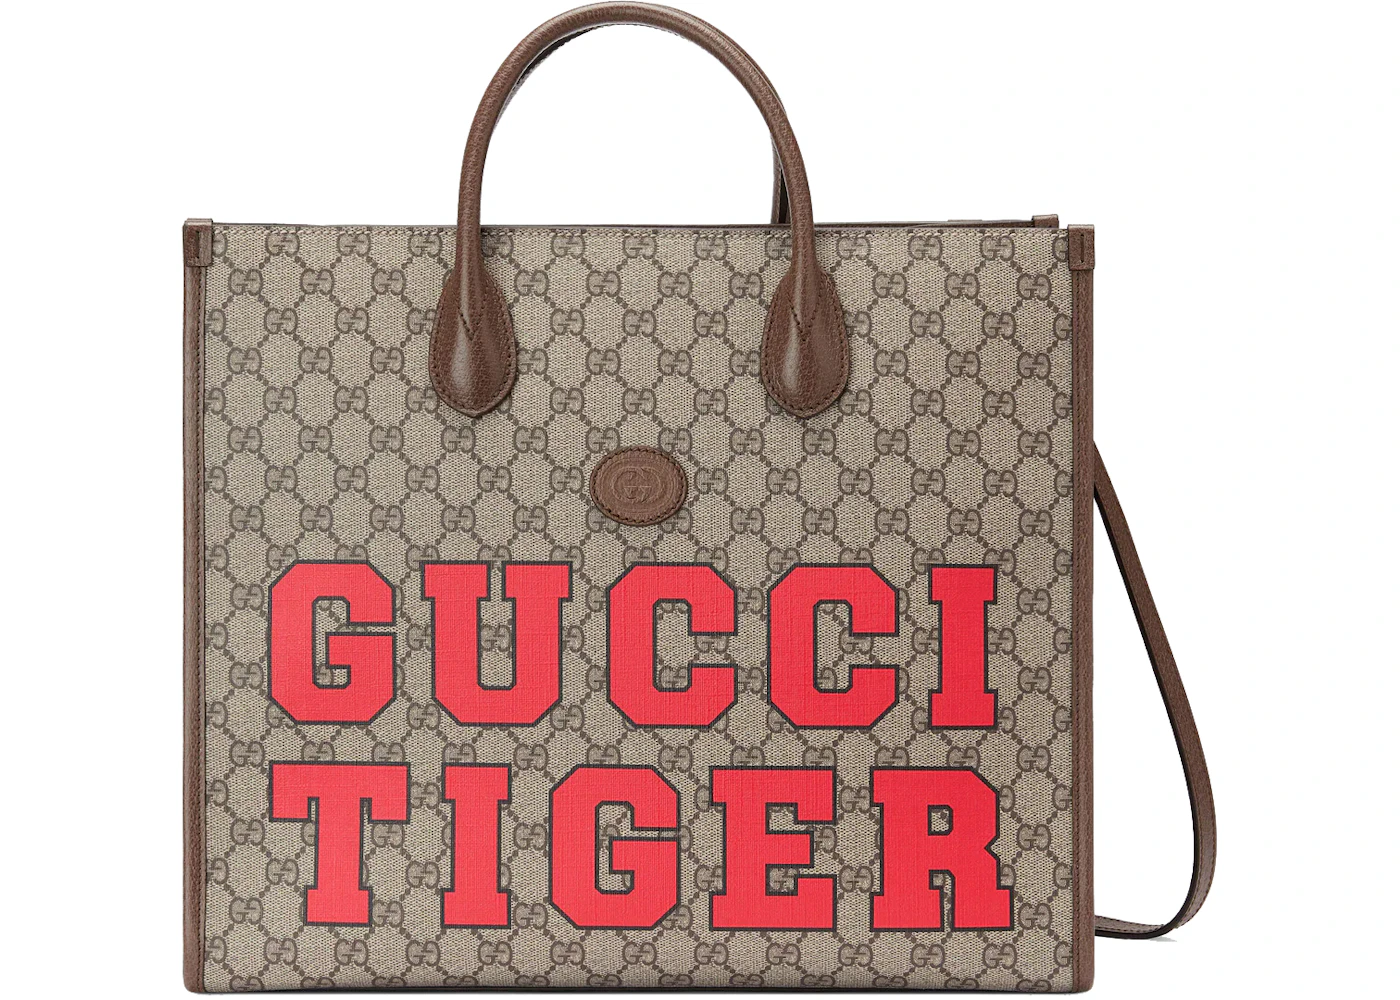 Gucci Tiger GG Medium Tote Bag Beige/Ebony in Canvas/Leather with